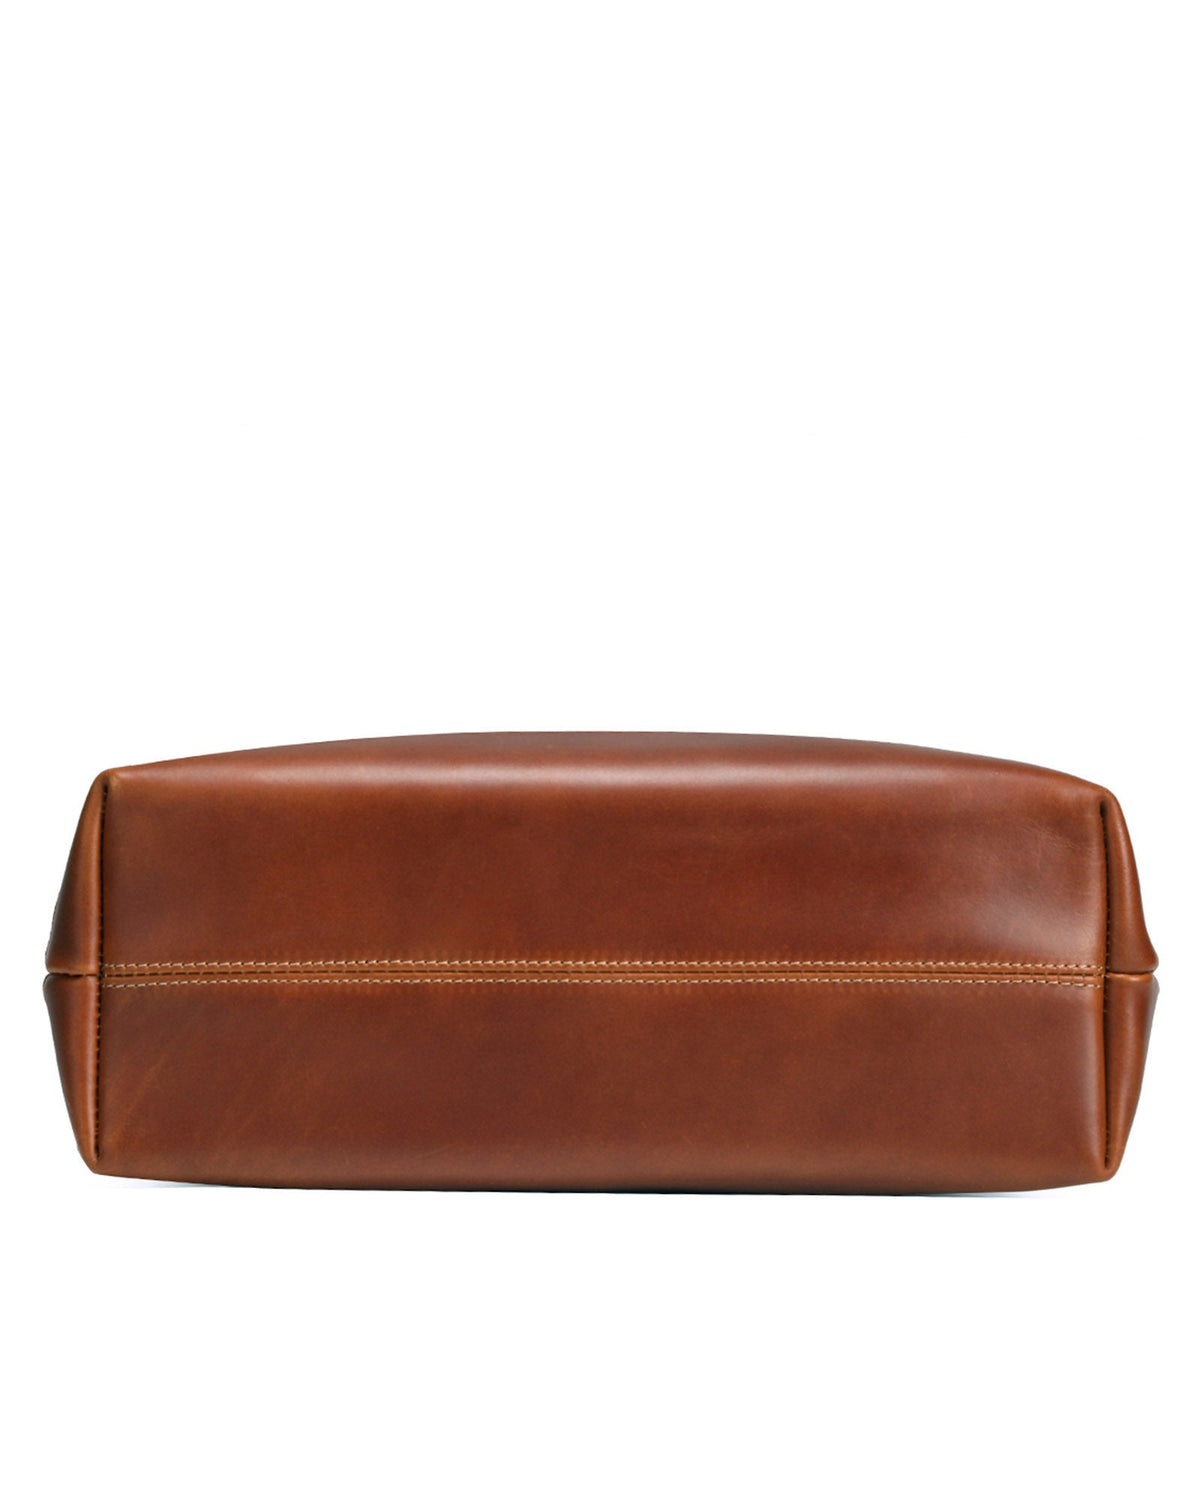 New Cowhide Solid Classic Purses and Handbags Women Wide Fabric